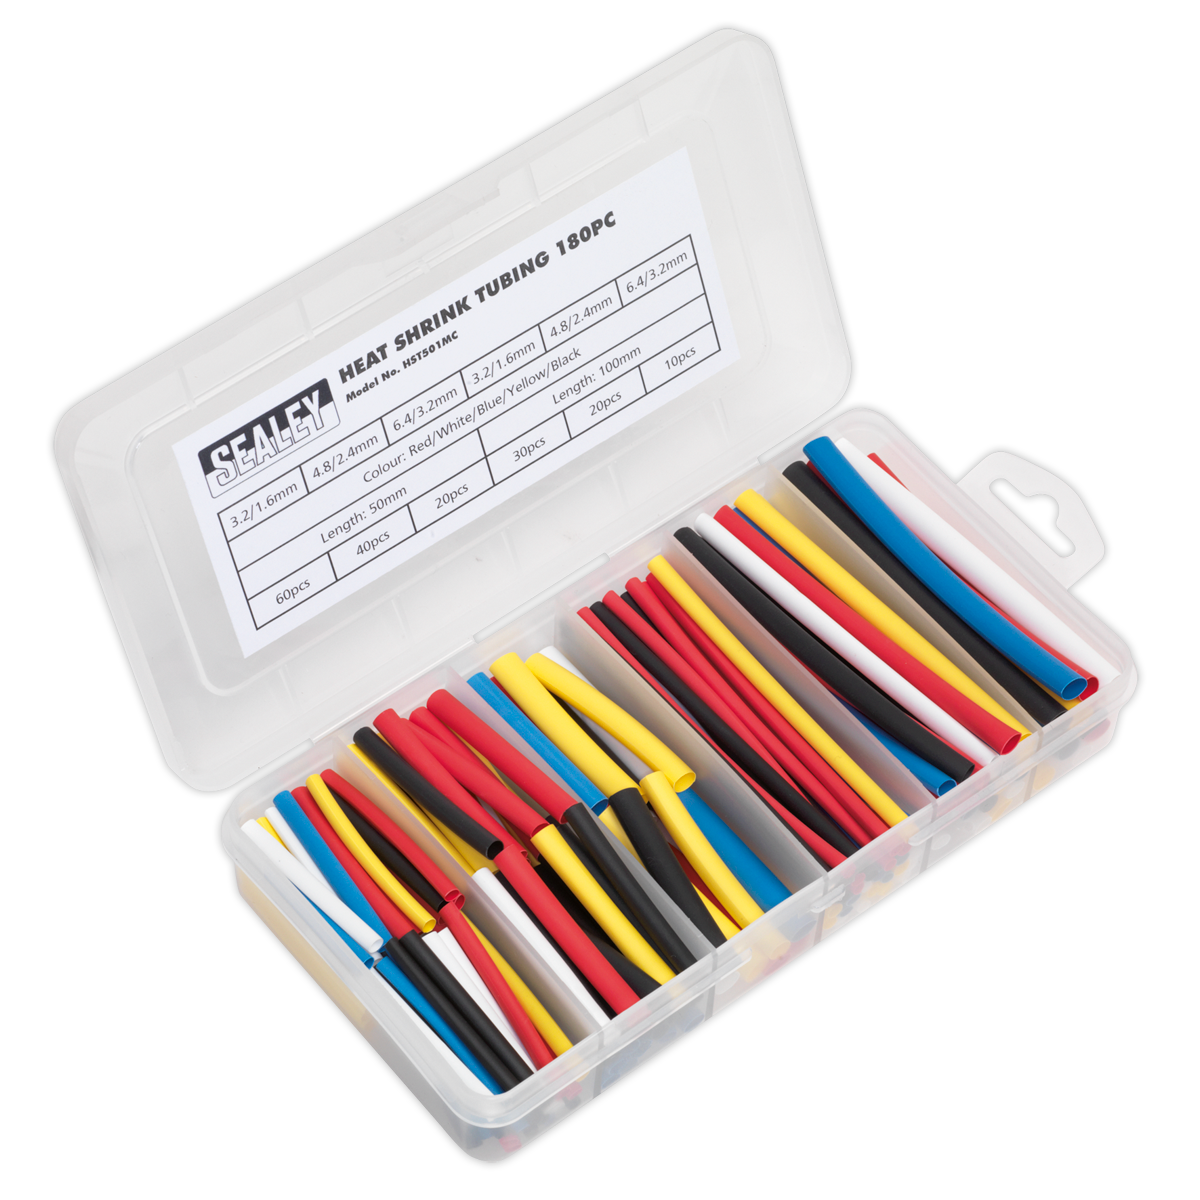 Sealey Heat Shrink Tubing Assortment 180pc 50 & 100mm Mixed Colours